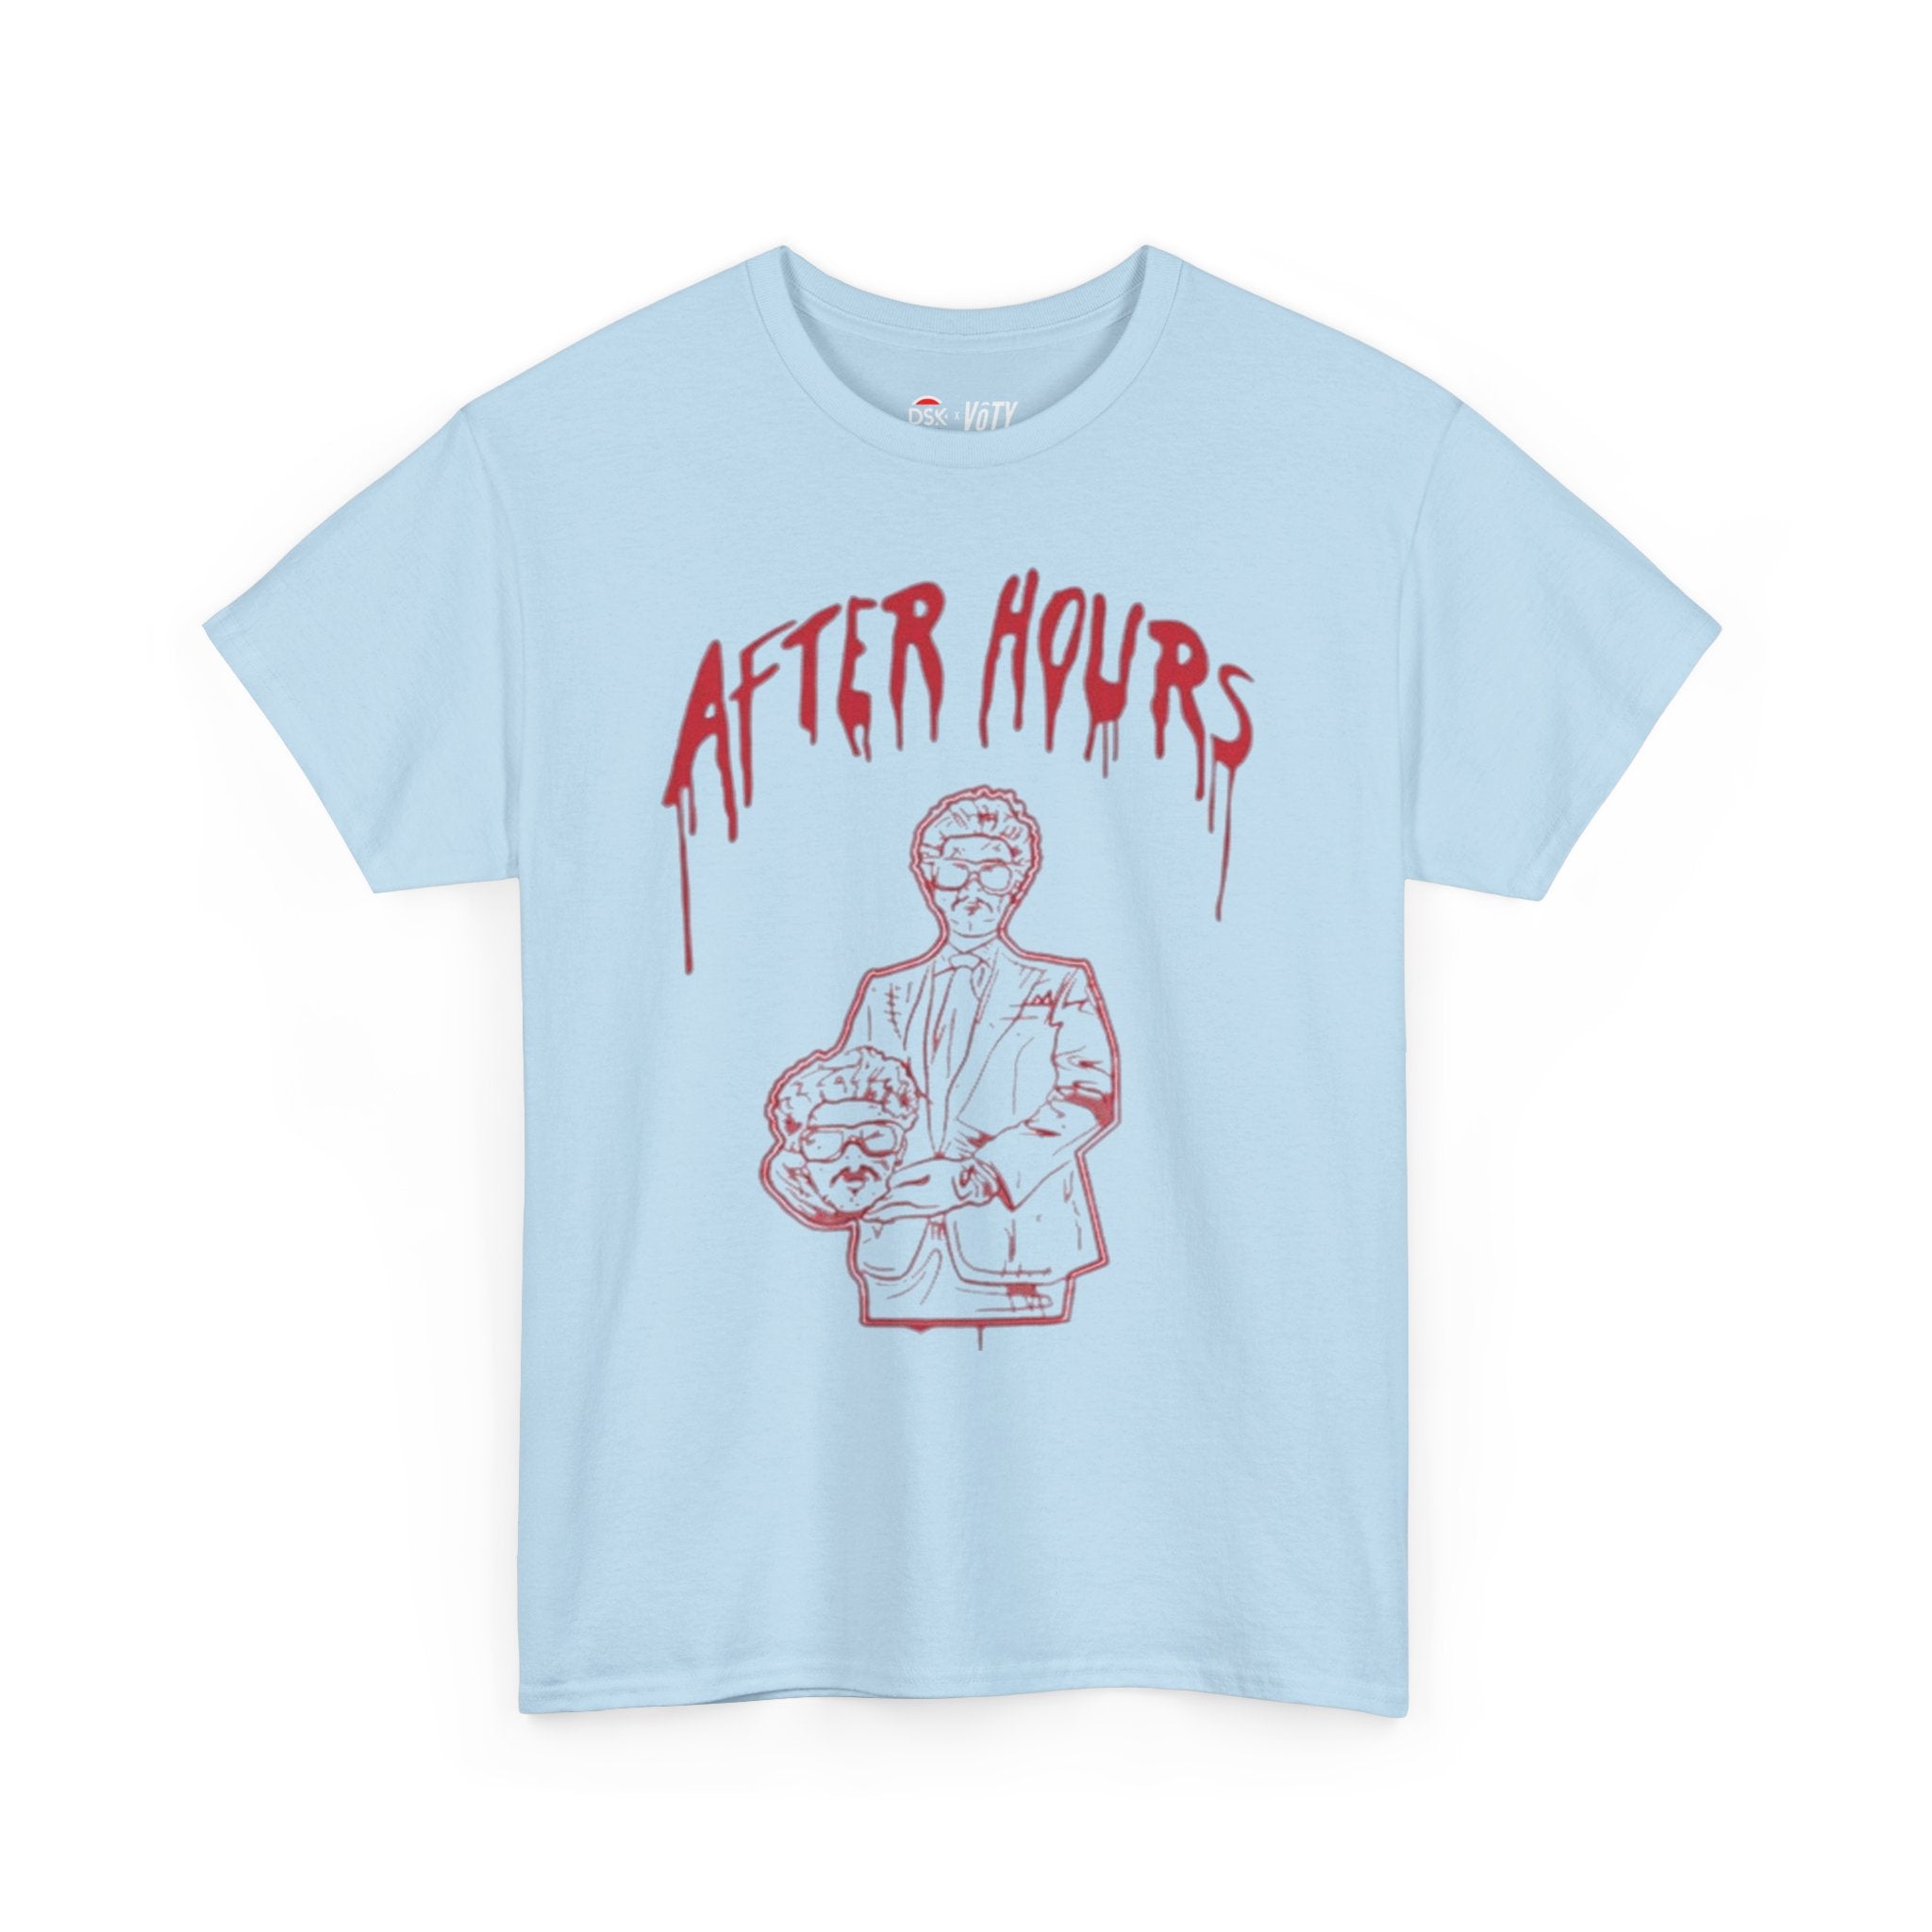 After Hours T-Shirt